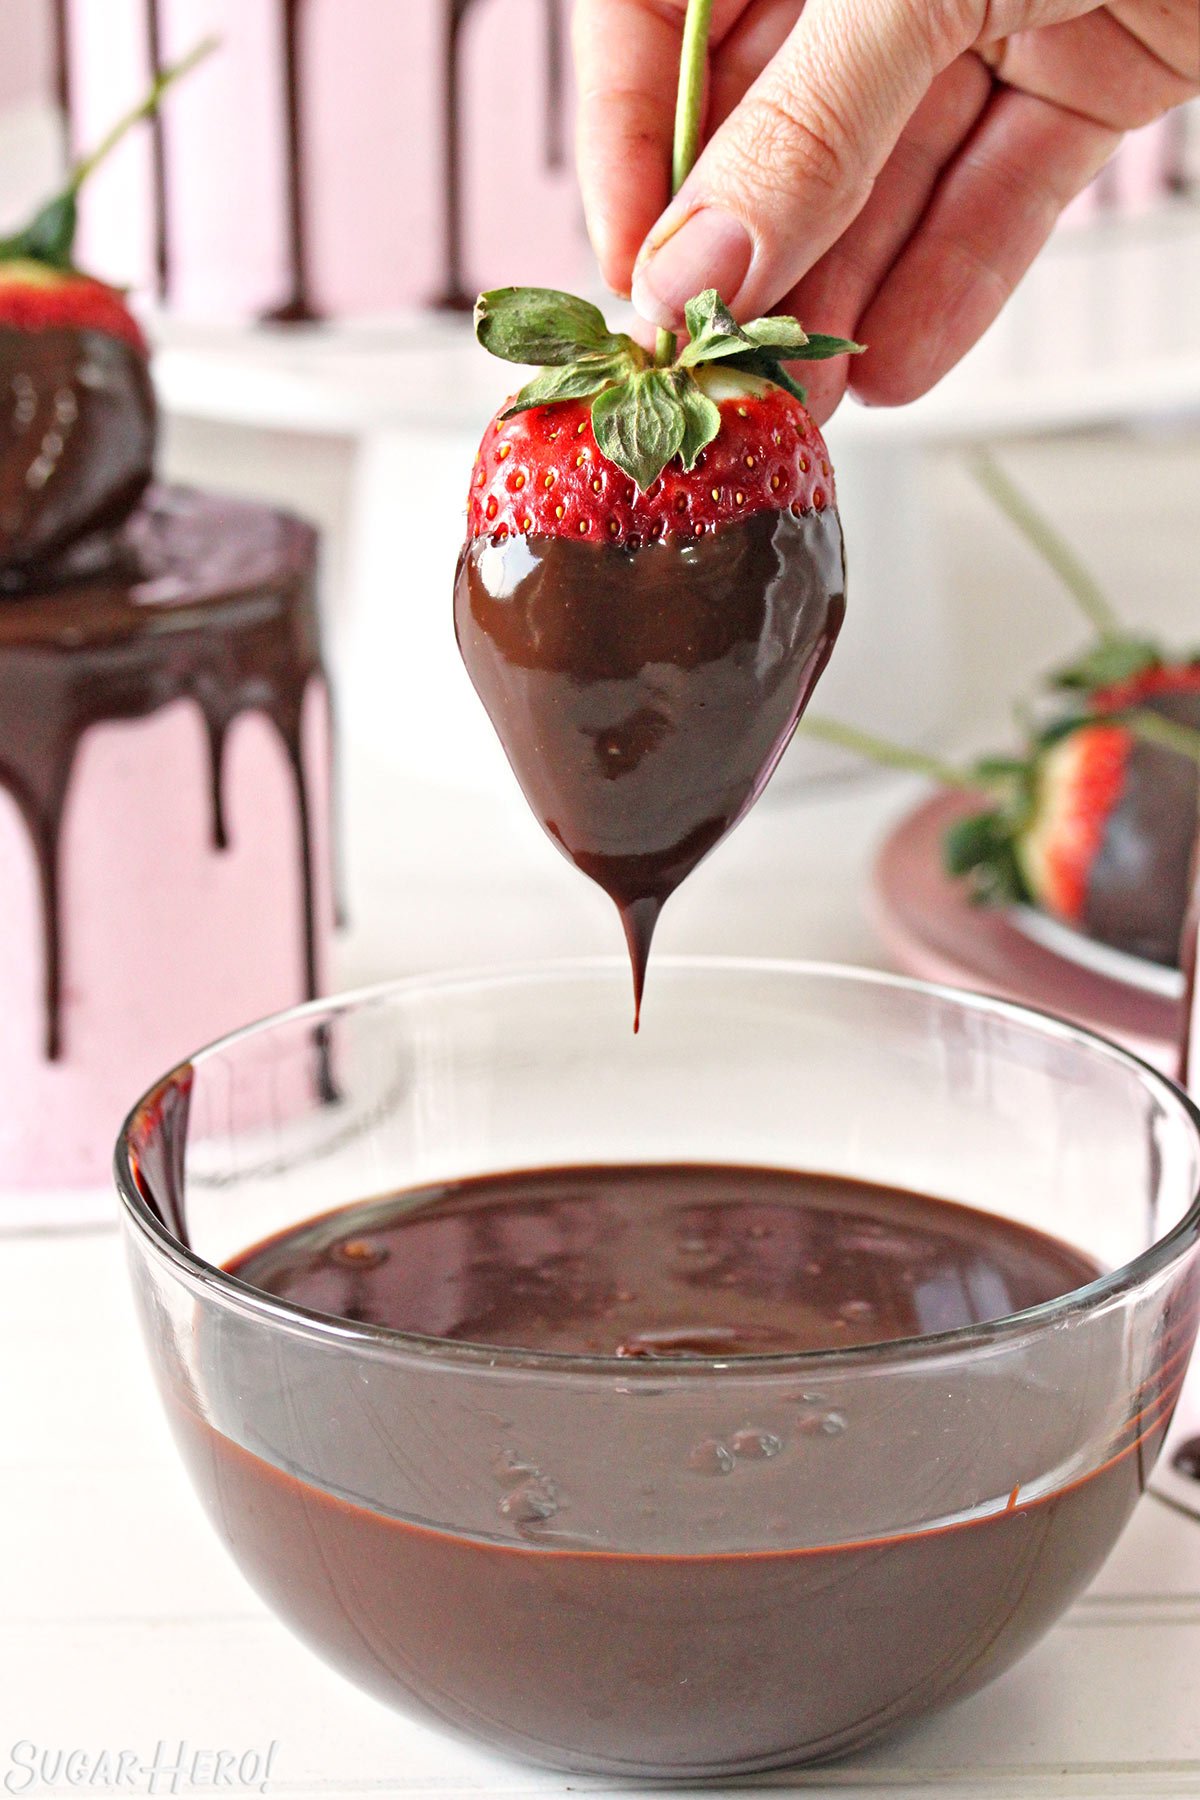 Hand holding a large strawberry by the stem, dripping melted chocolate back into a chocolate bowl below.